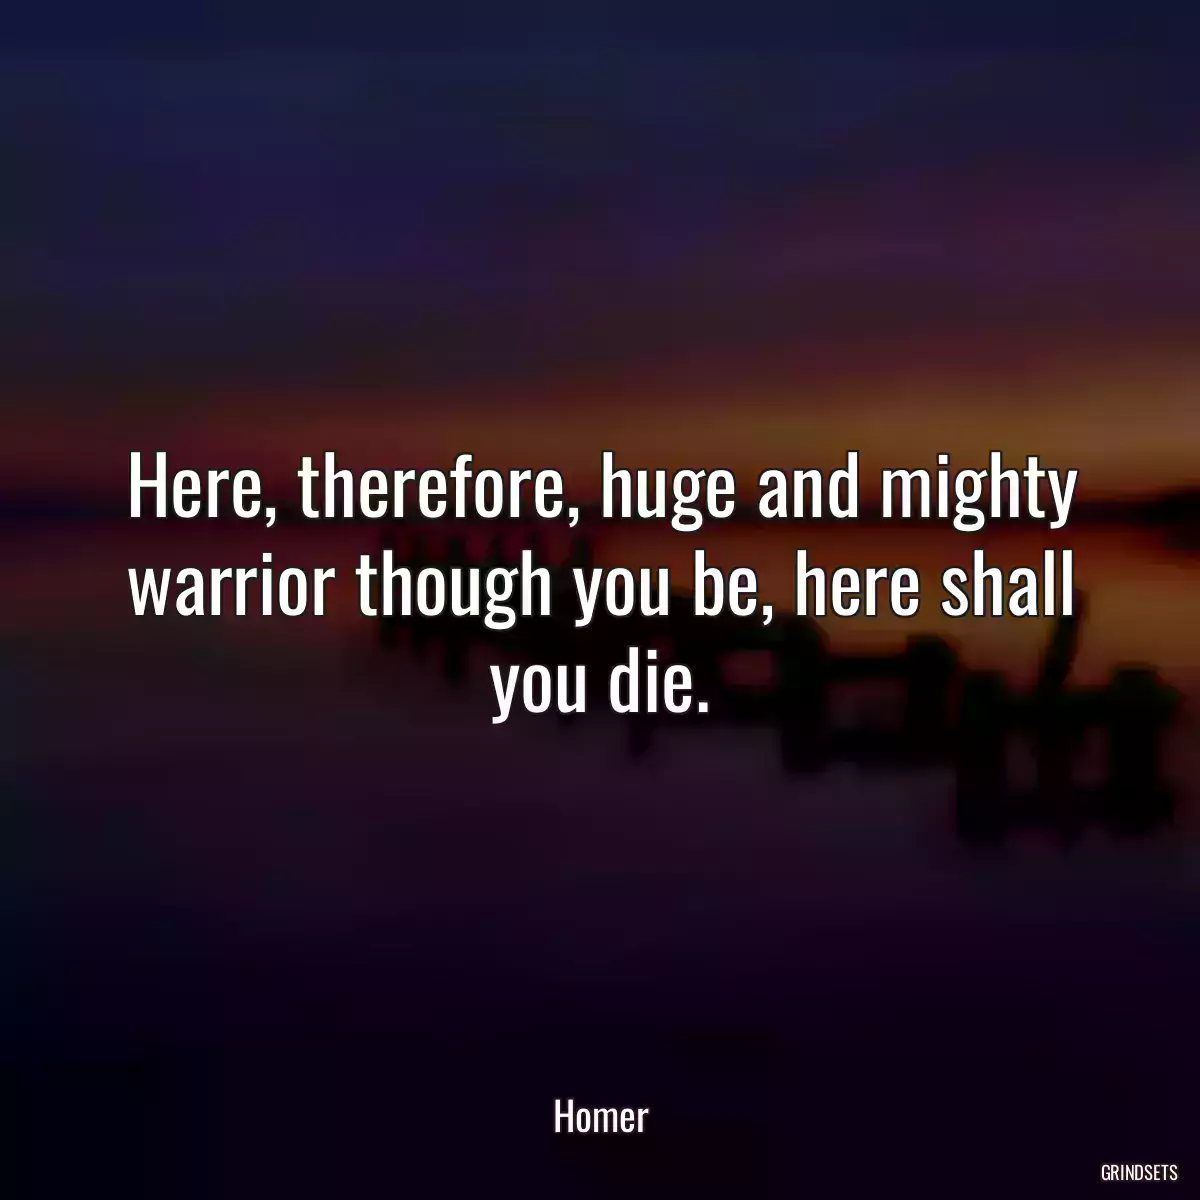 Here, therefore, huge and mighty warrior though you be, here shall you die.